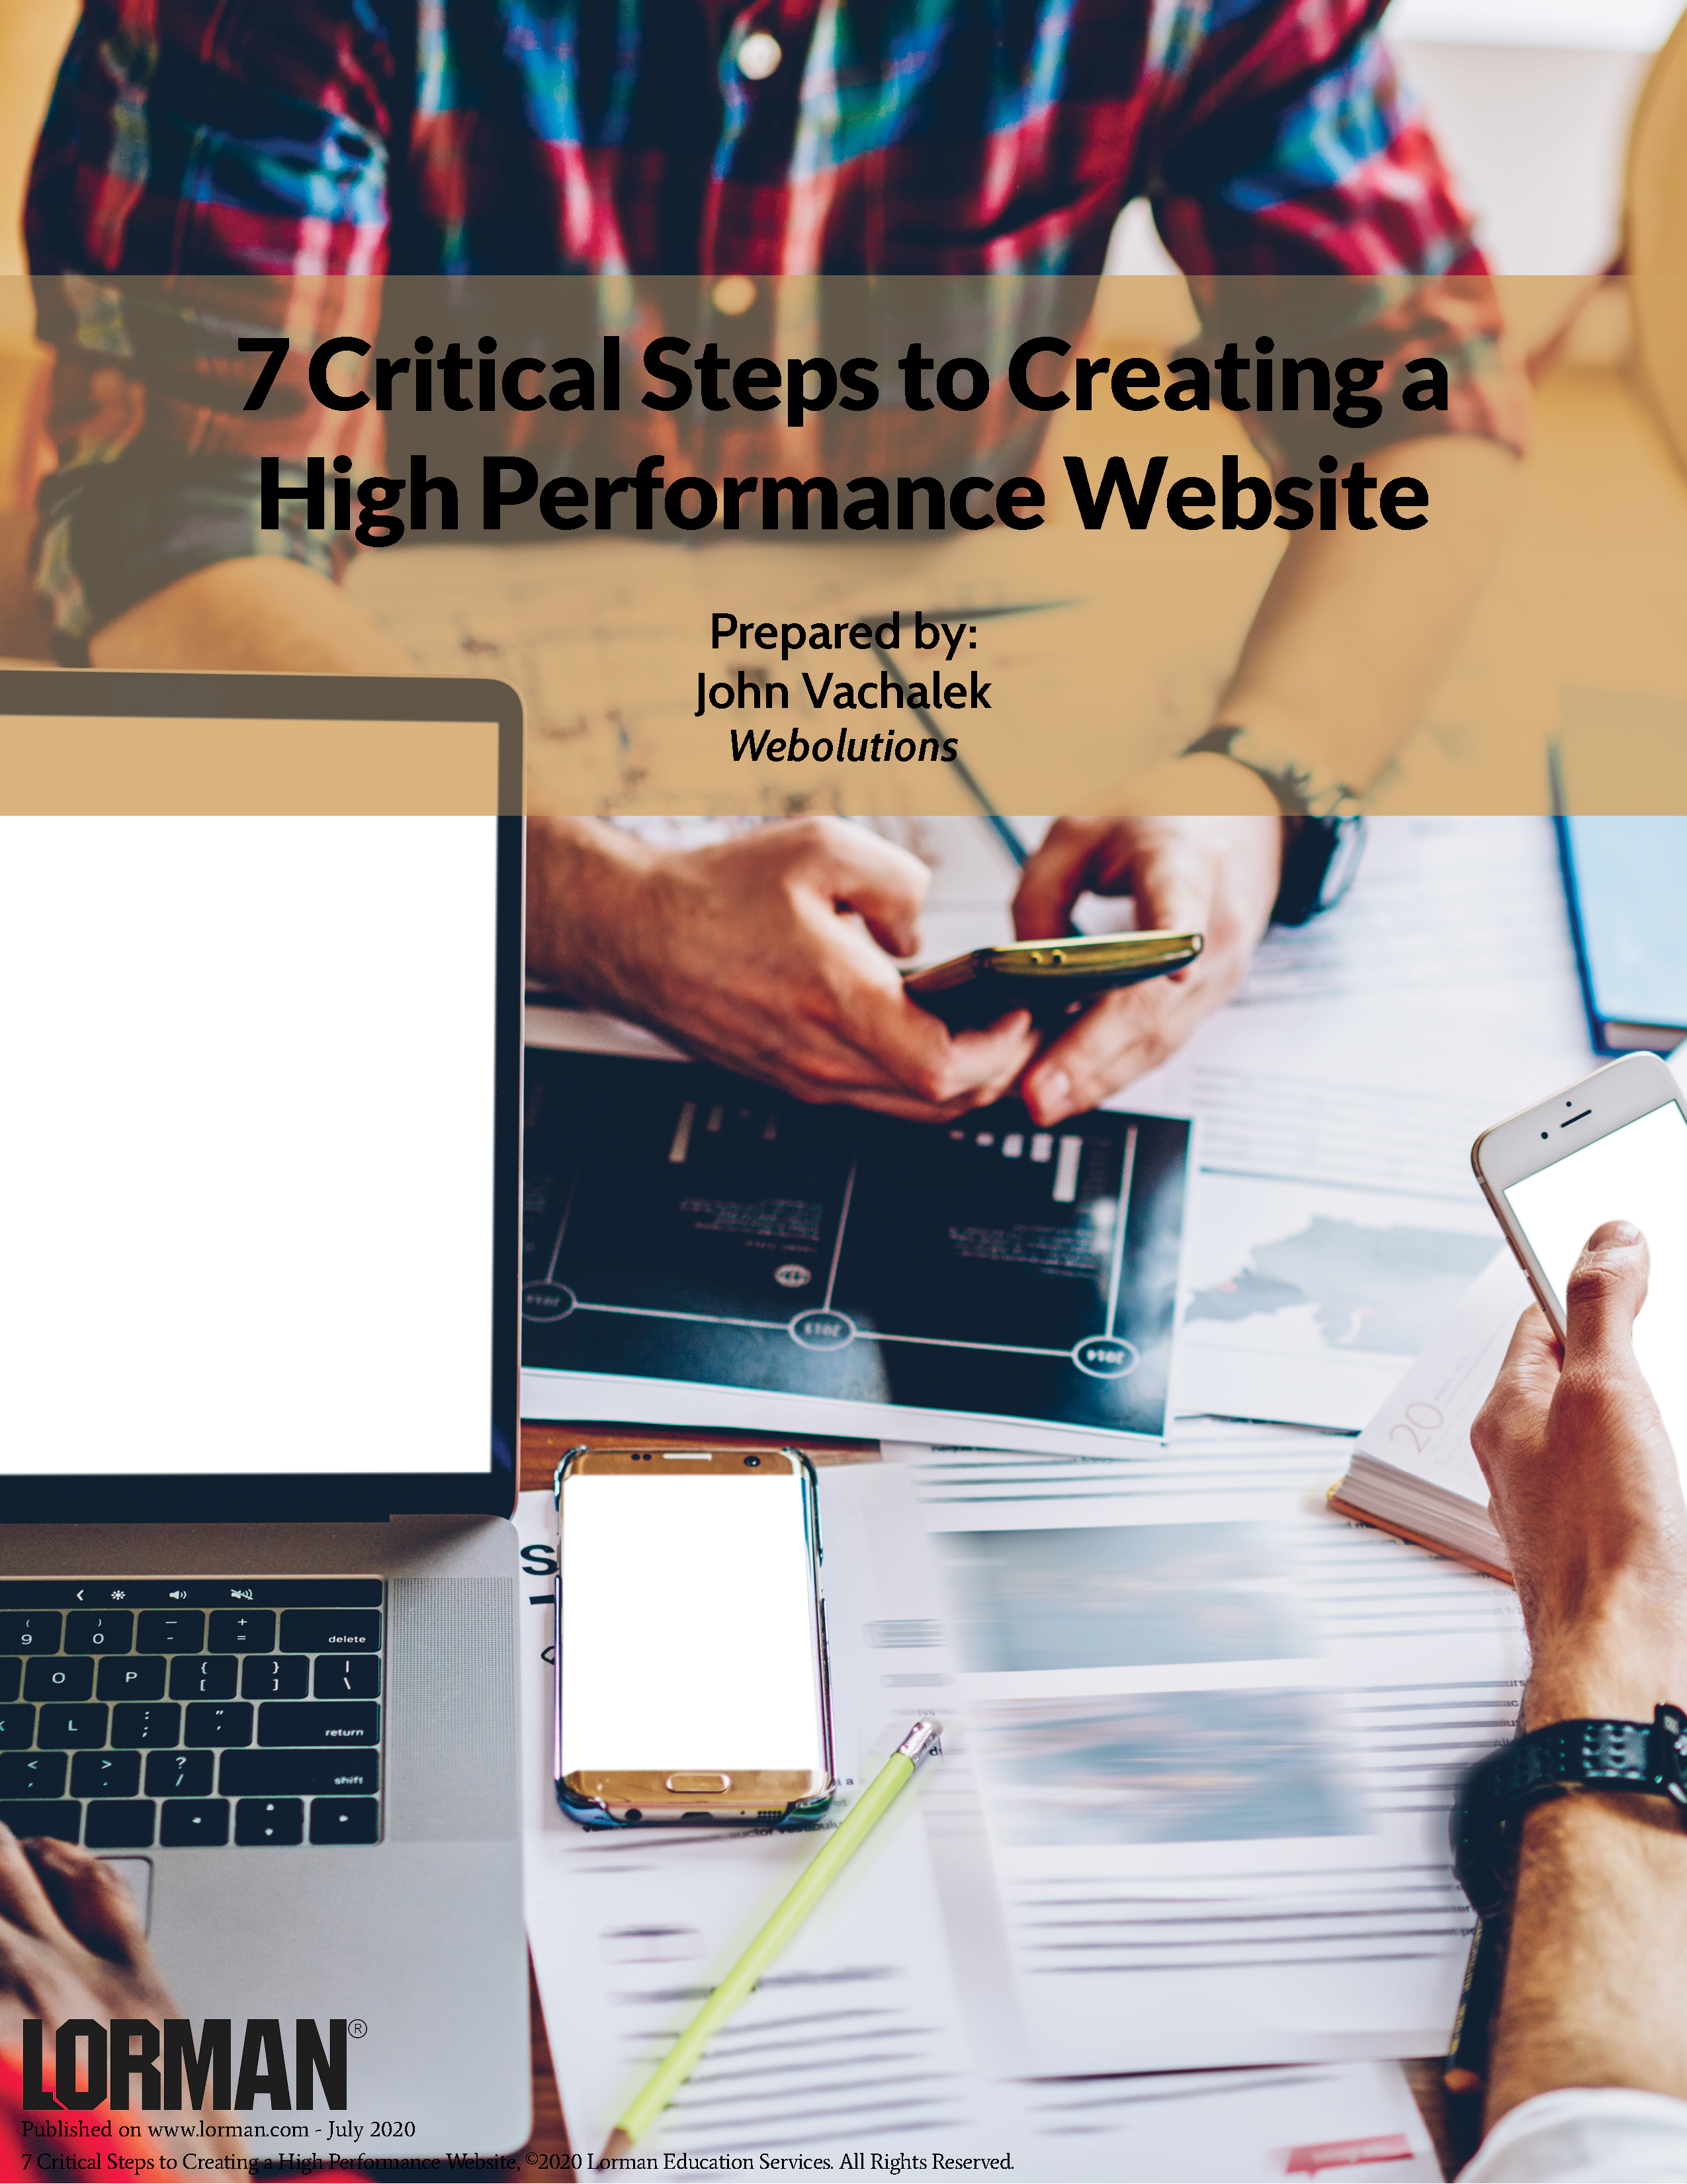 7 Critical Steps to Creating a High Performance Website